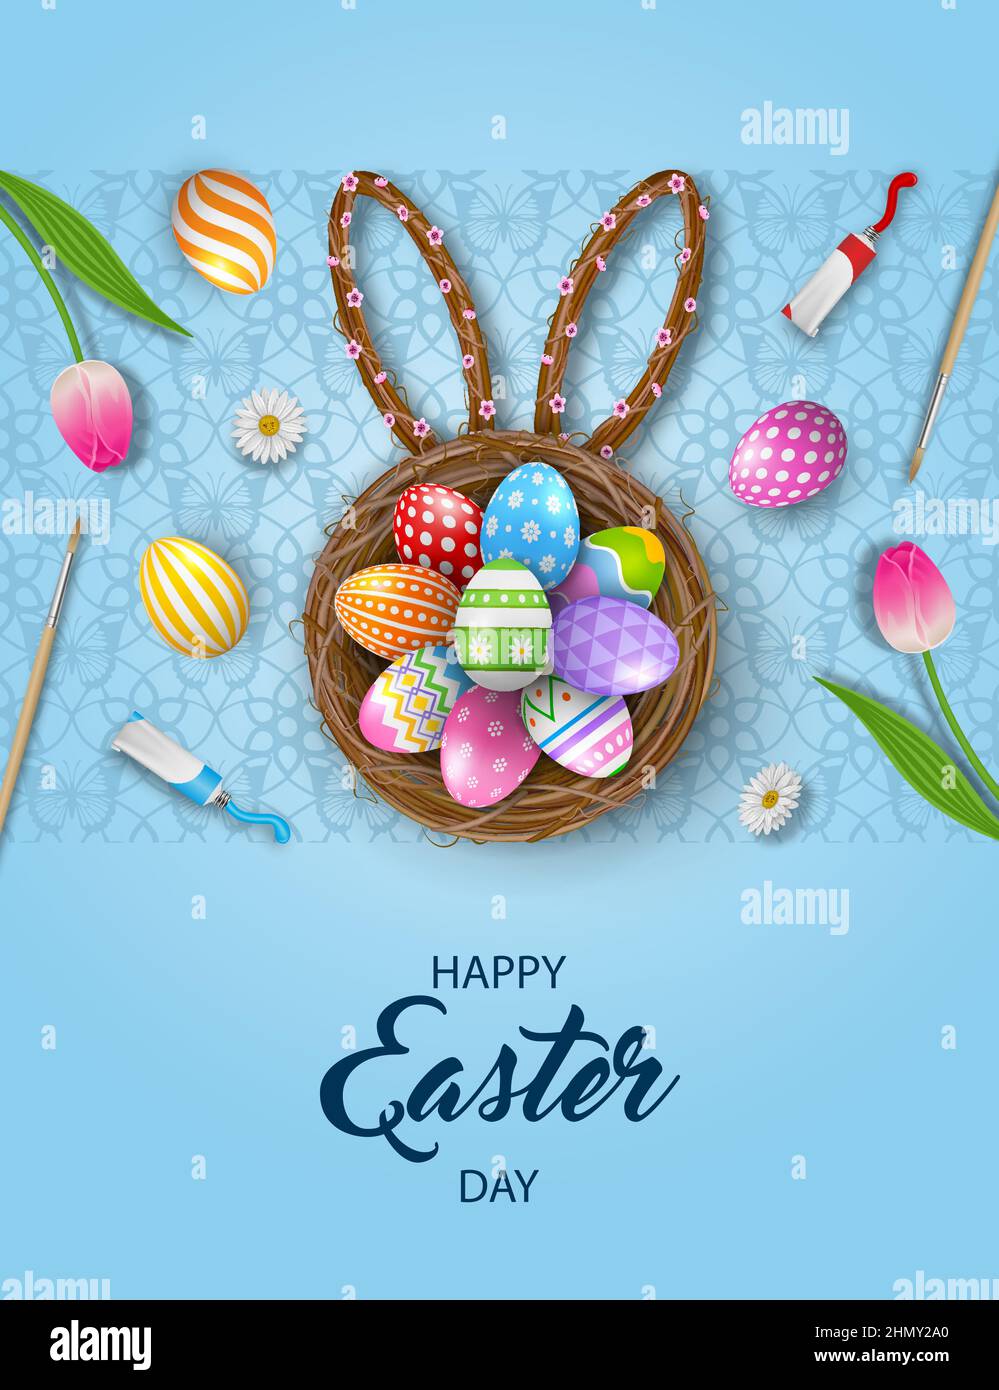 Happy easter poster with decorated eggs in the nest, brushes, tempera tubes and flowers Stock Vector